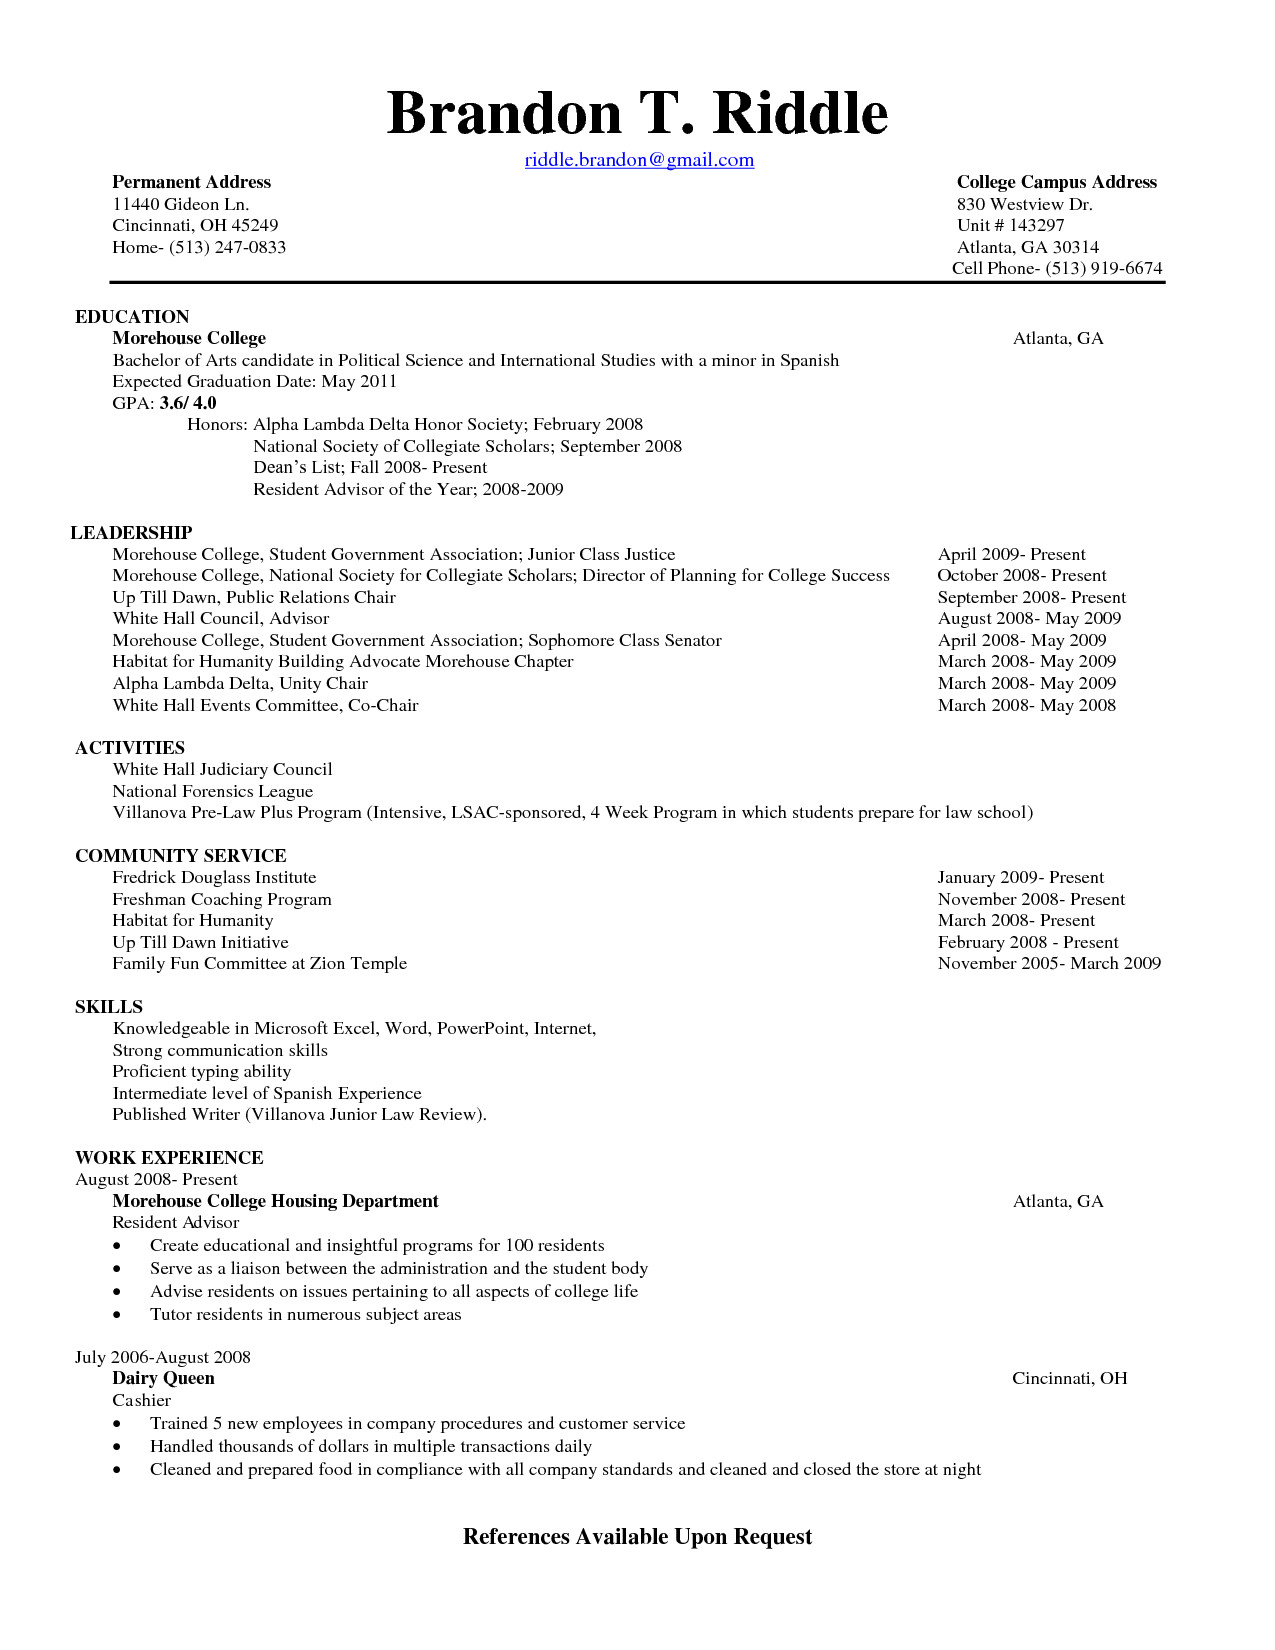 College Admissions Resume Template Pin by Jobresume On Resume Career Termplate Free